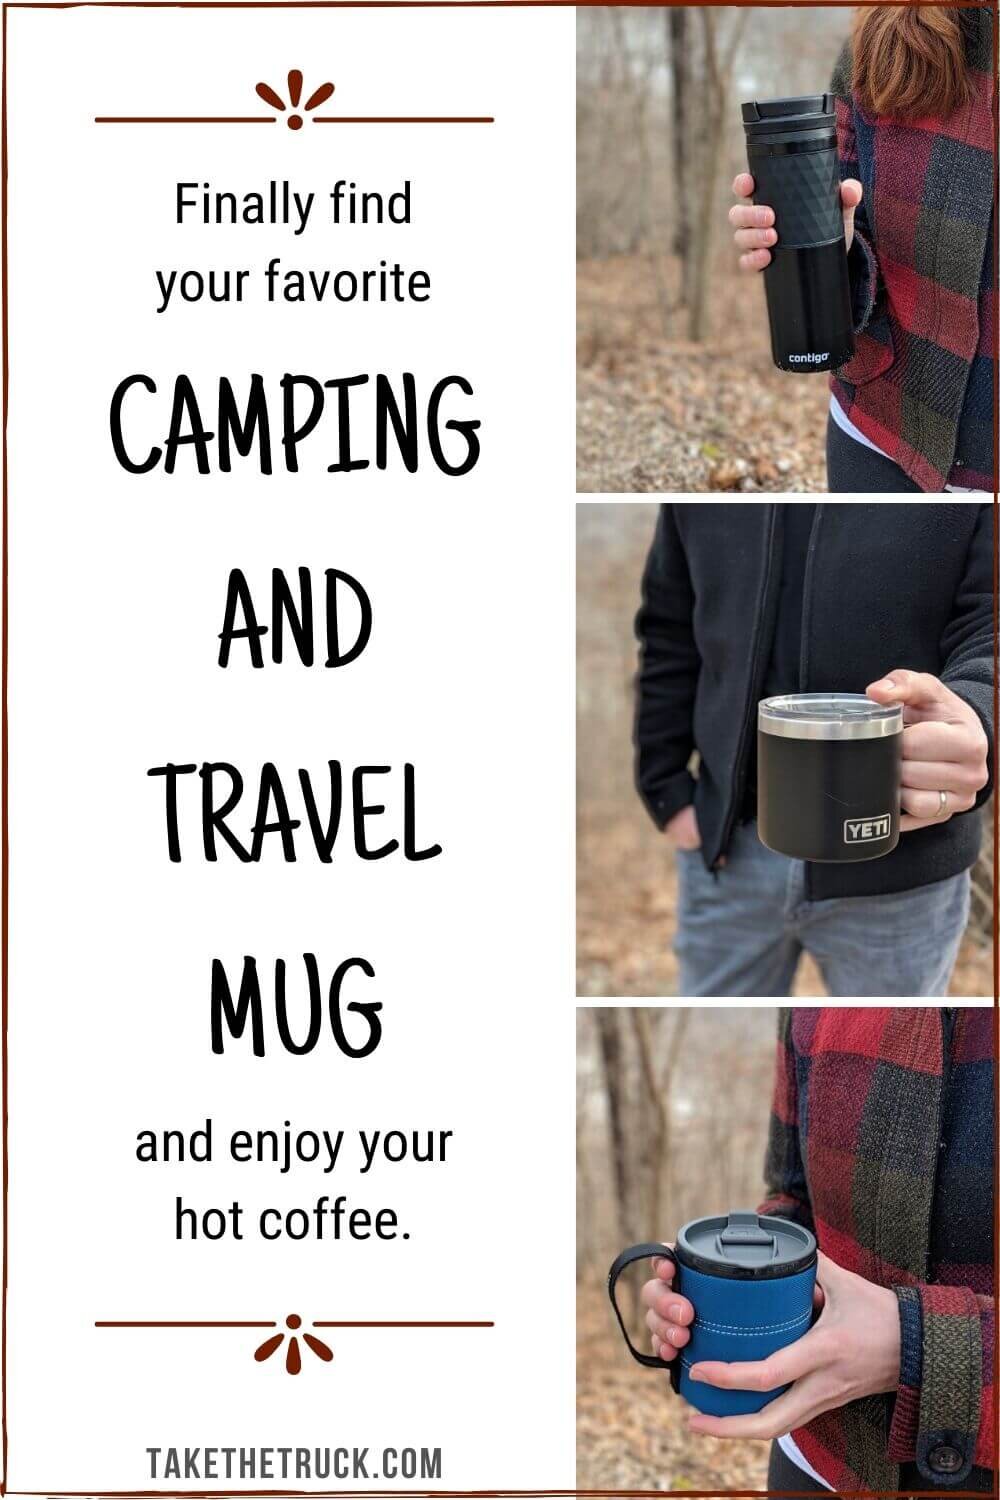 Finally find the best travel coffee mug and best camping mug that keeps coffee hot with no spills! We’ve got a simple guide for choosing the best camping coffee mug plus our top three product picks.